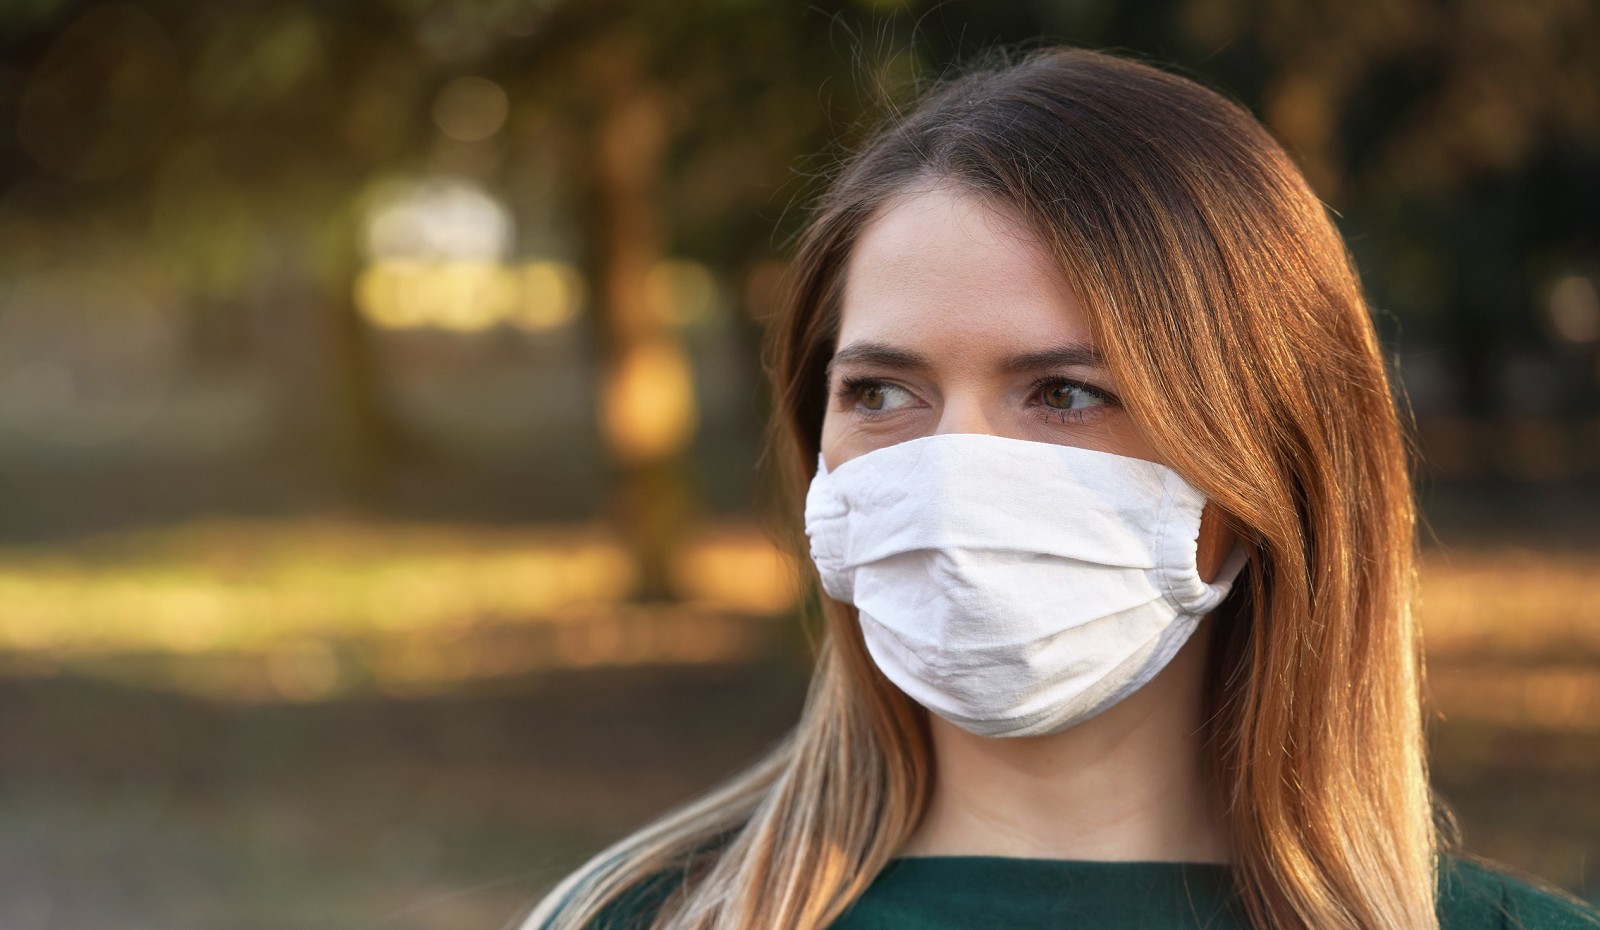 Coming to the Hospital? Please wear a mask.